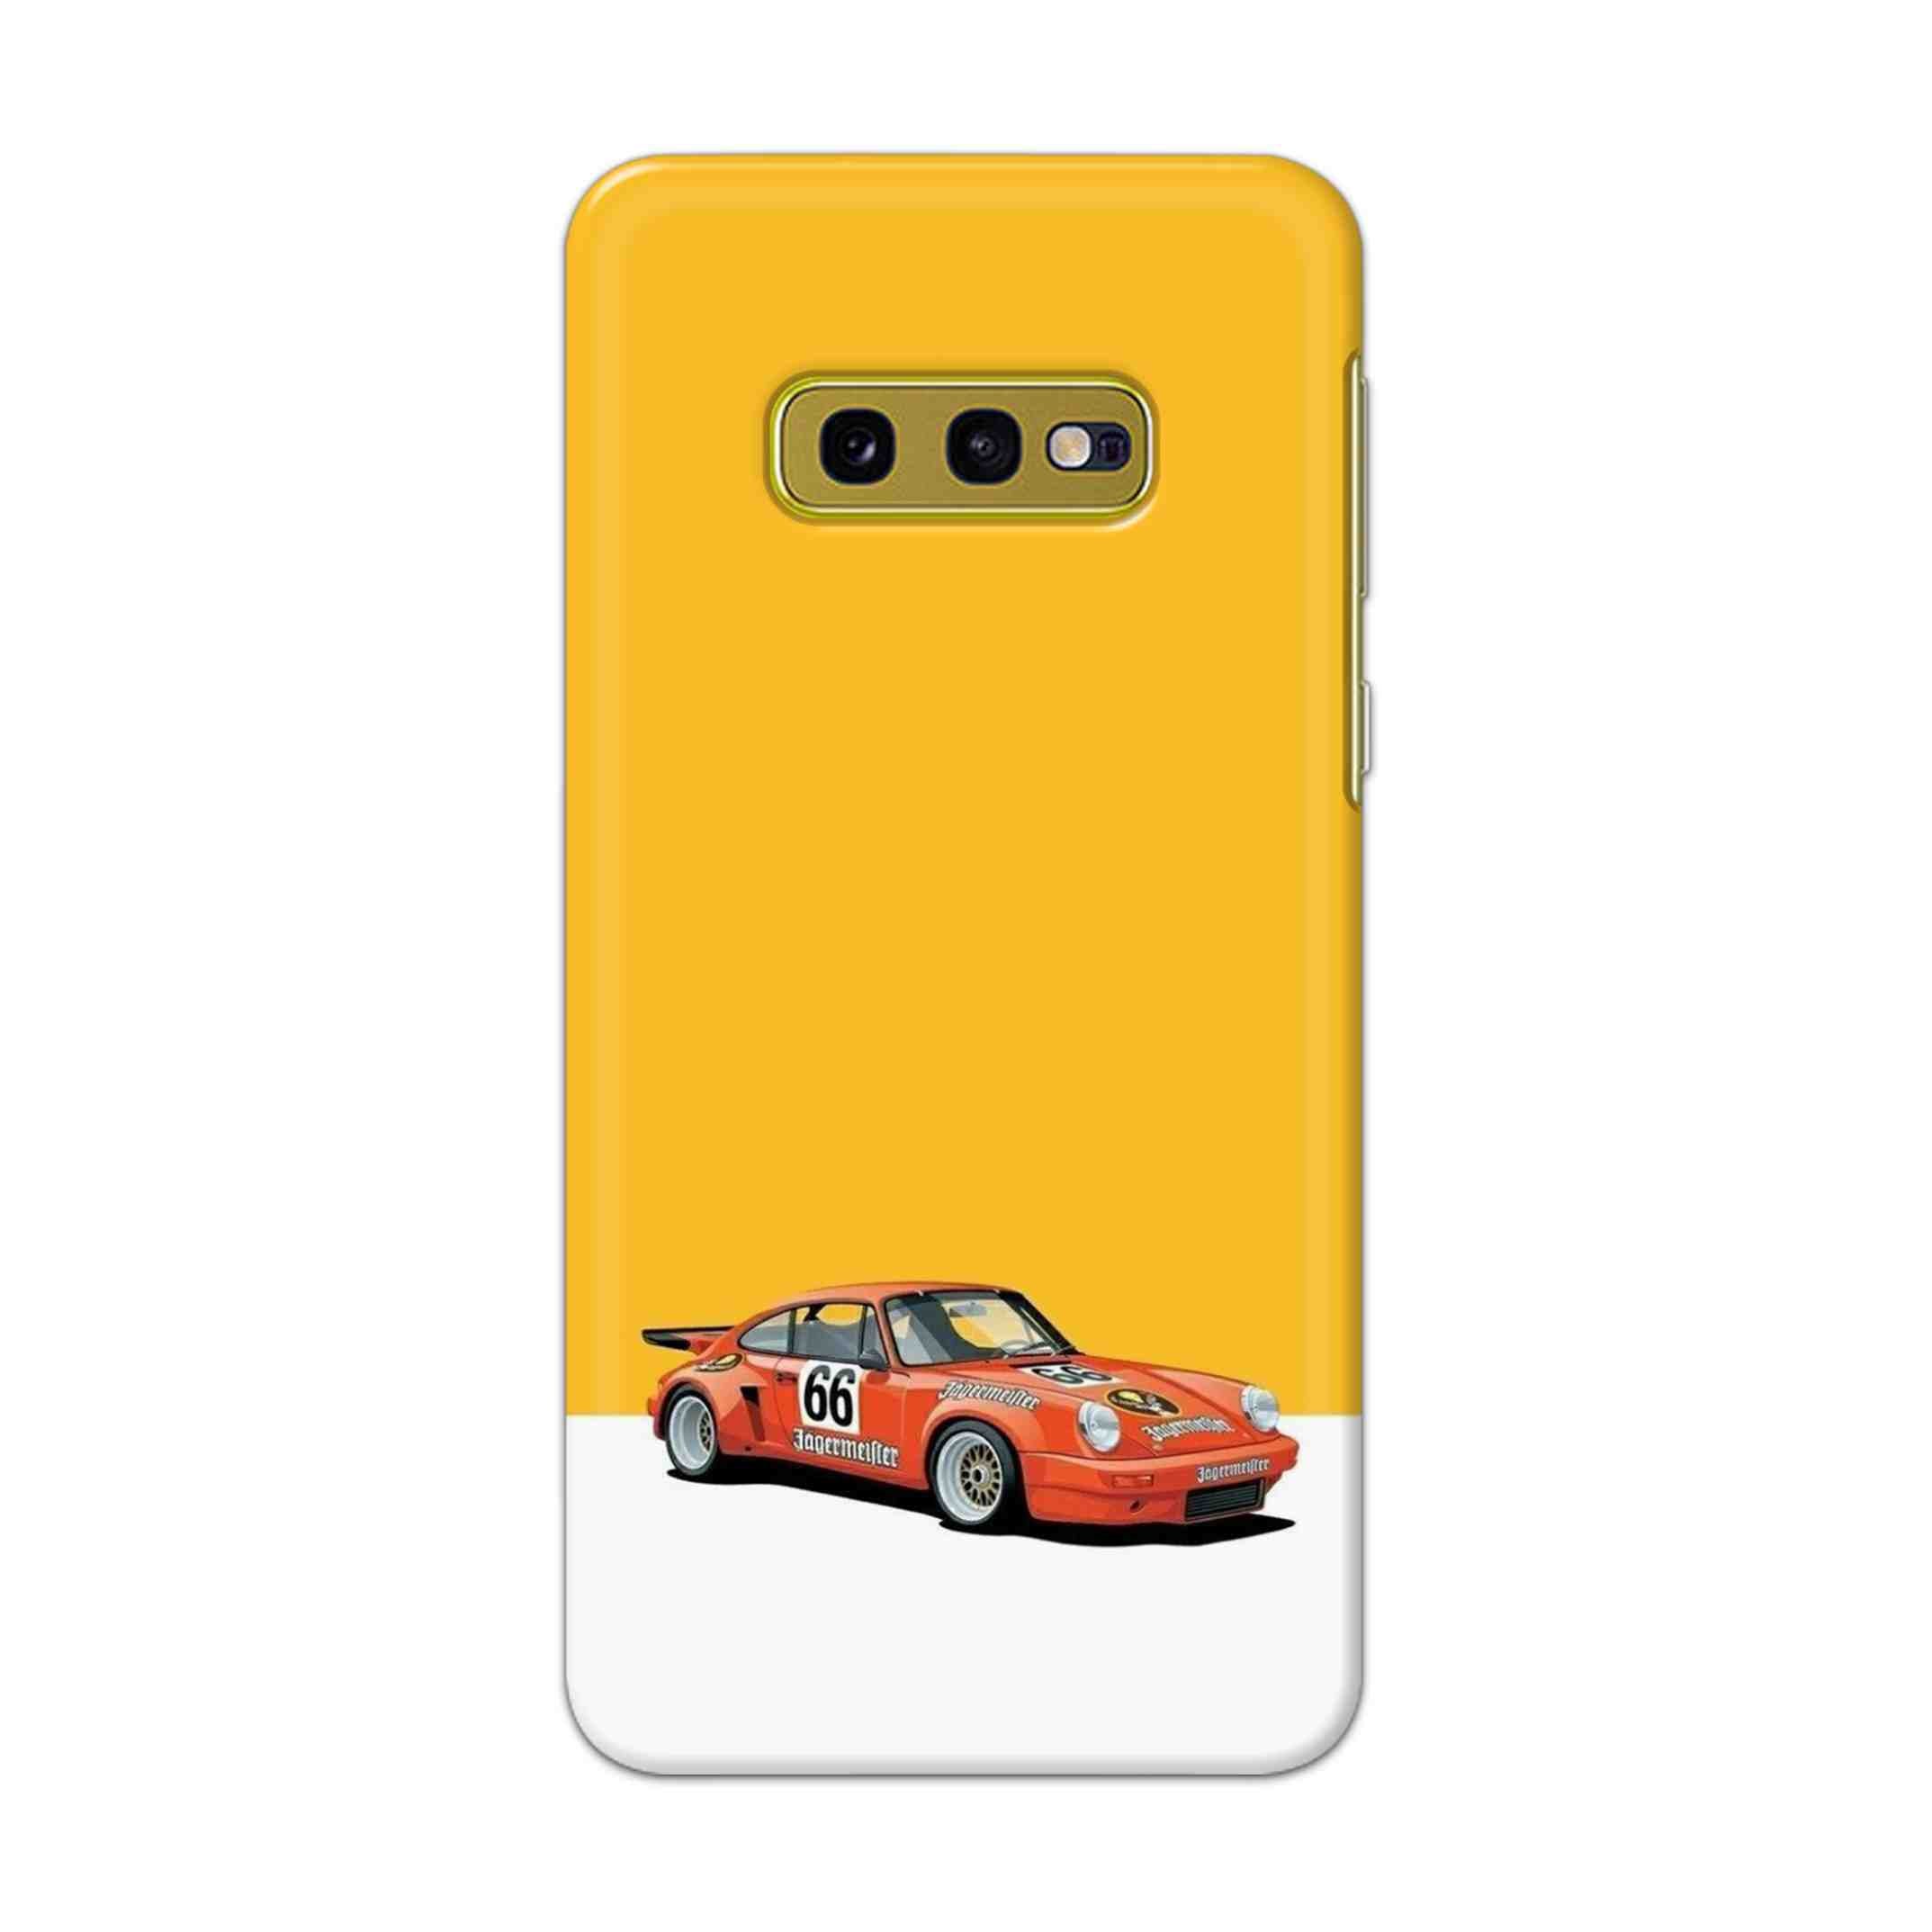 Buy Porche Hard Back Mobile Phone Case Cover For Samsung Galaxy S10e Online